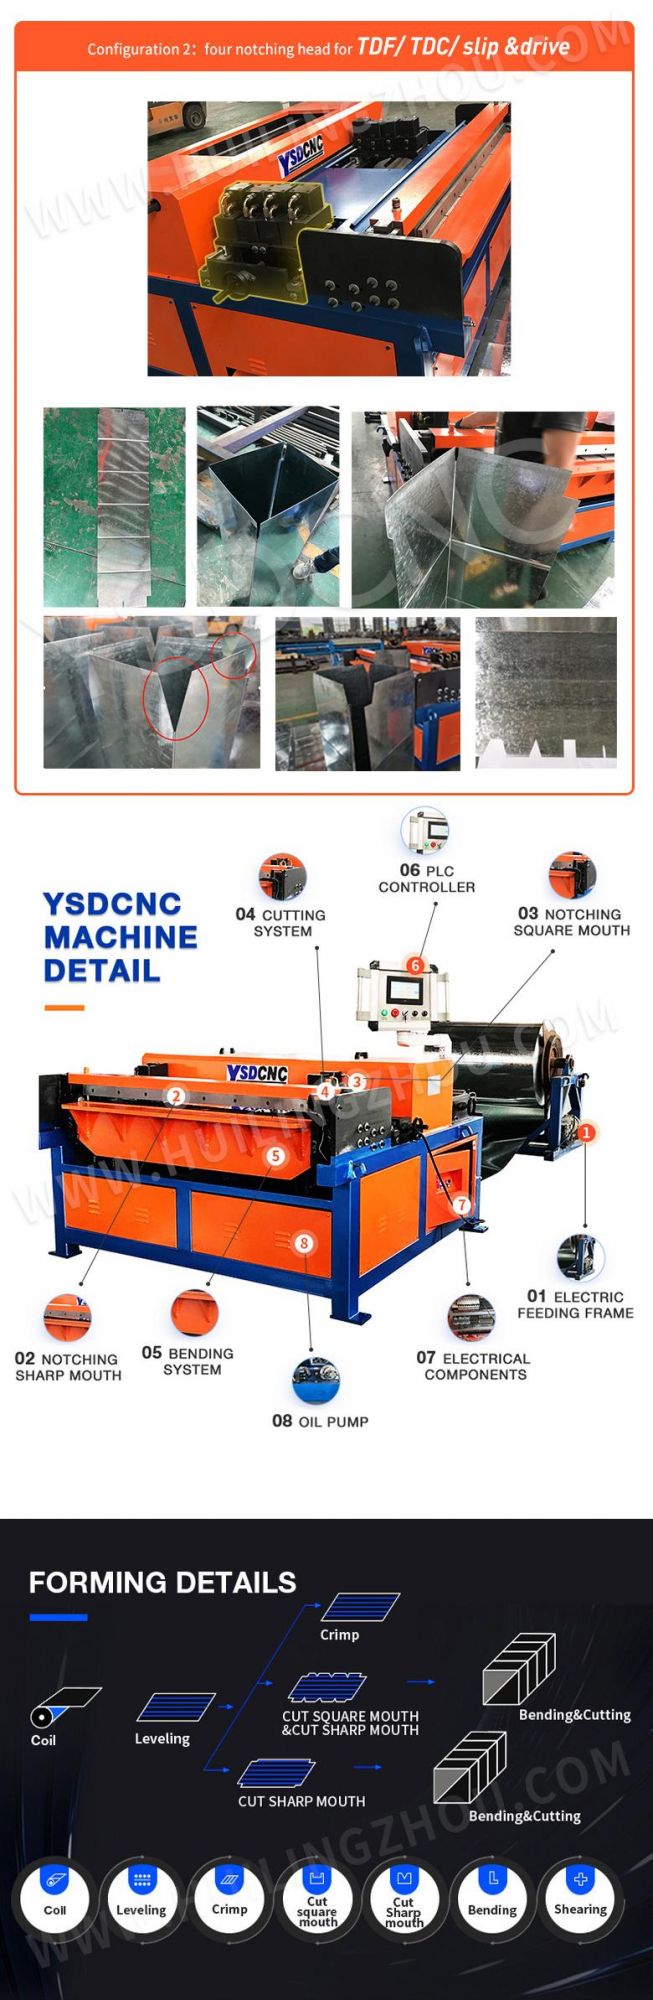 Instock Duct Manufacture Auto Line III / HVAC Rectangular Air Duct Production Line/Duct Production Line